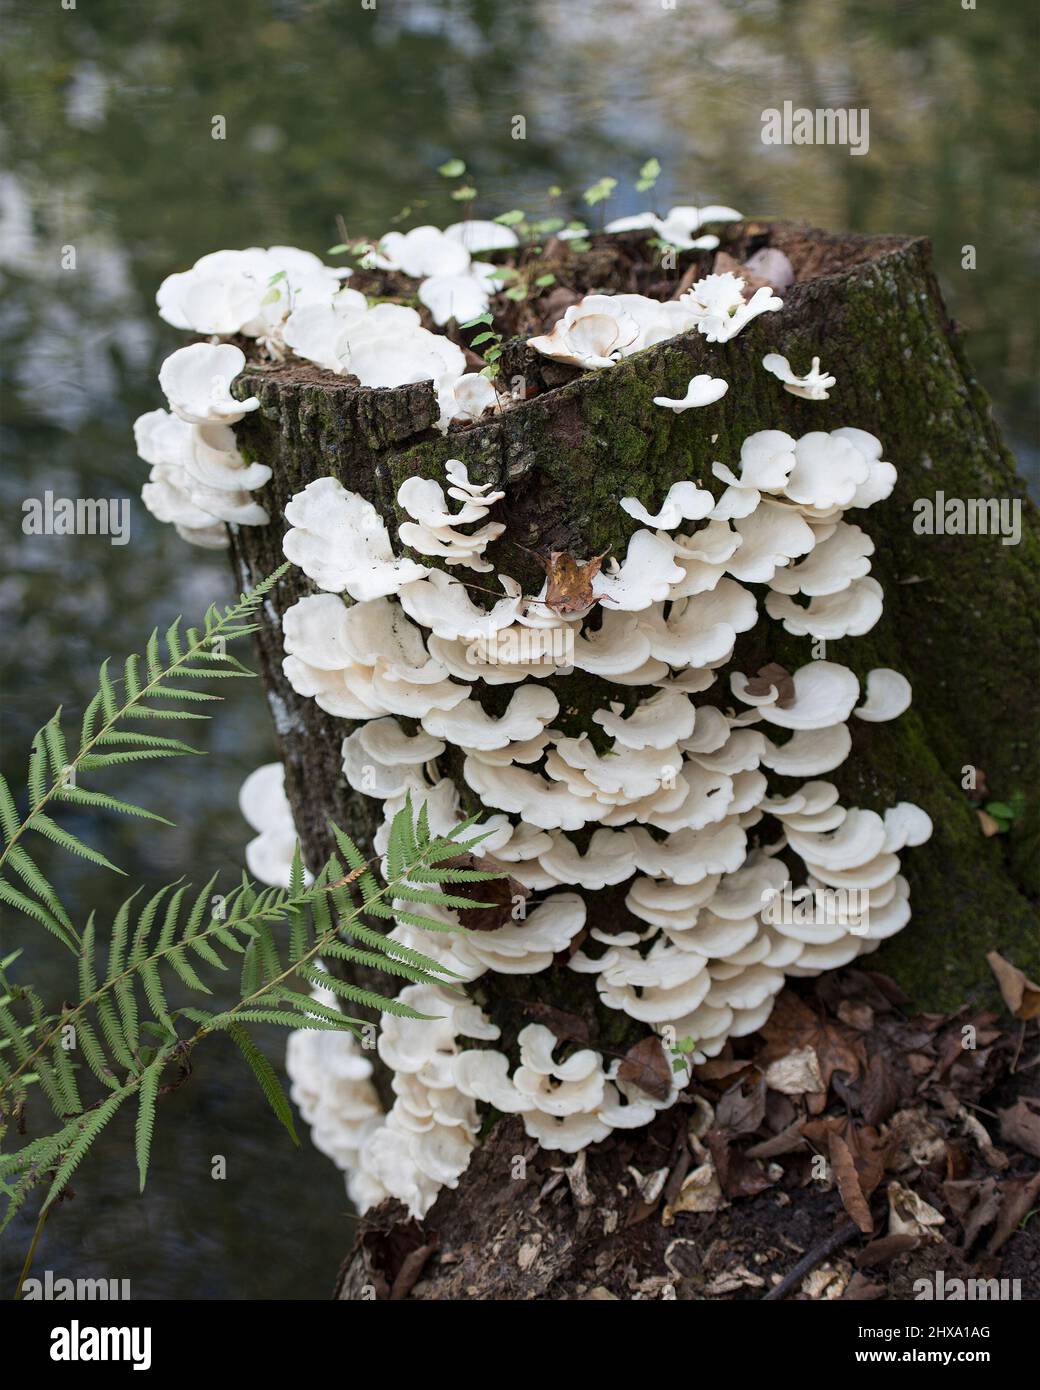 Mushrooms patch on a dead timber tree with blur foliage background and insect in its environment and habitat surrounding. White Fungus Portrait. Stock Photo